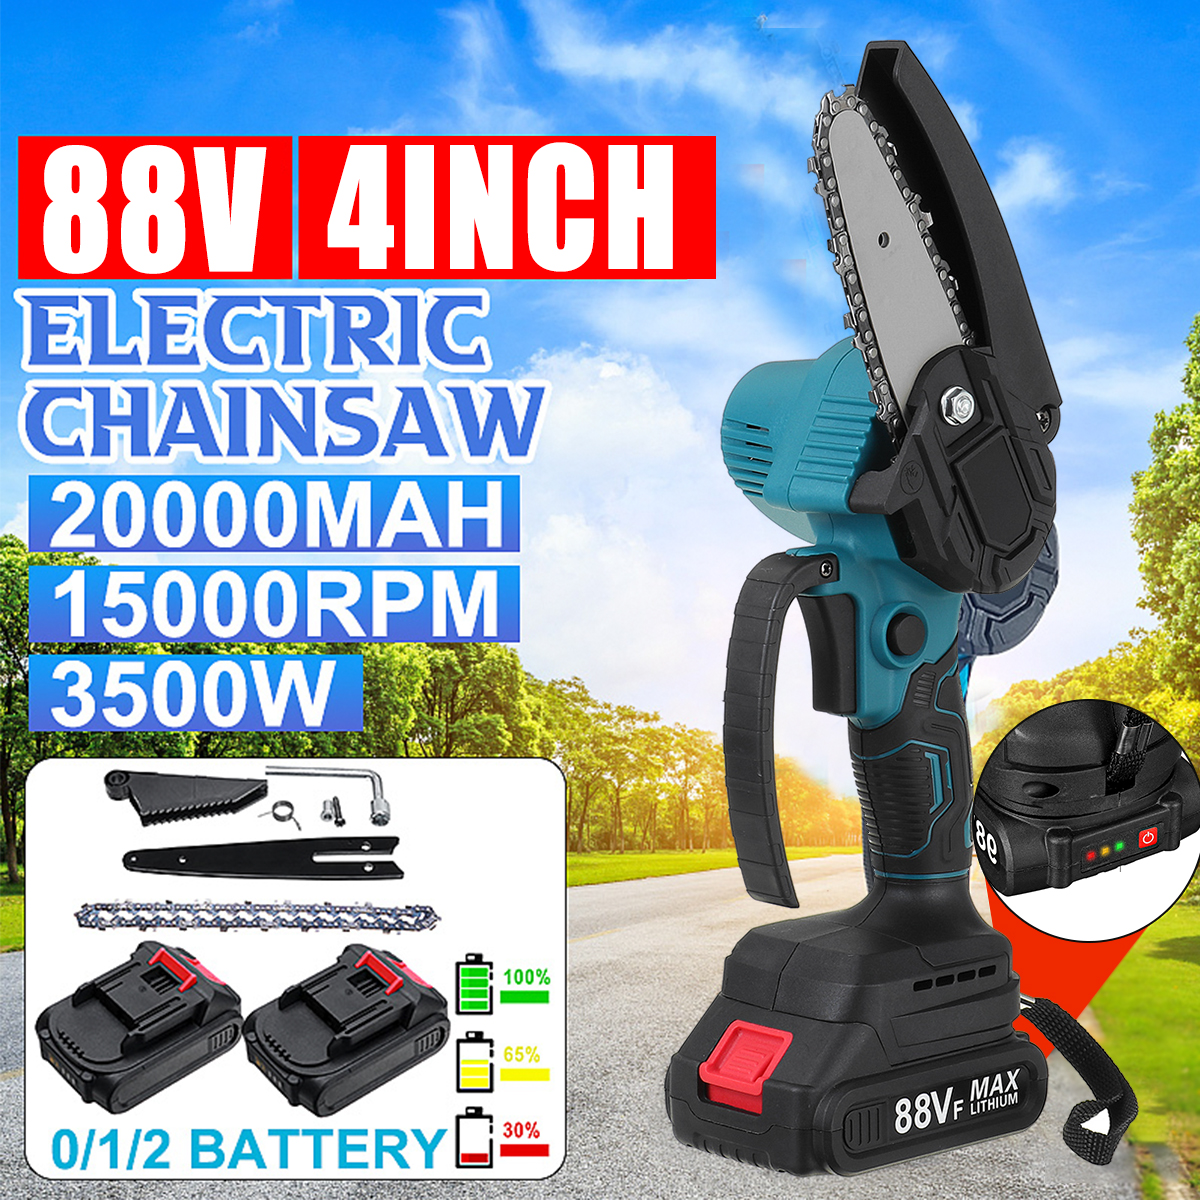 4quot-88VF-Cordless-Electric-Chainsaw-Rechargeable-Woodworking-Saw-Wood-Cutter-W-None12-Battery-For--1856704-2